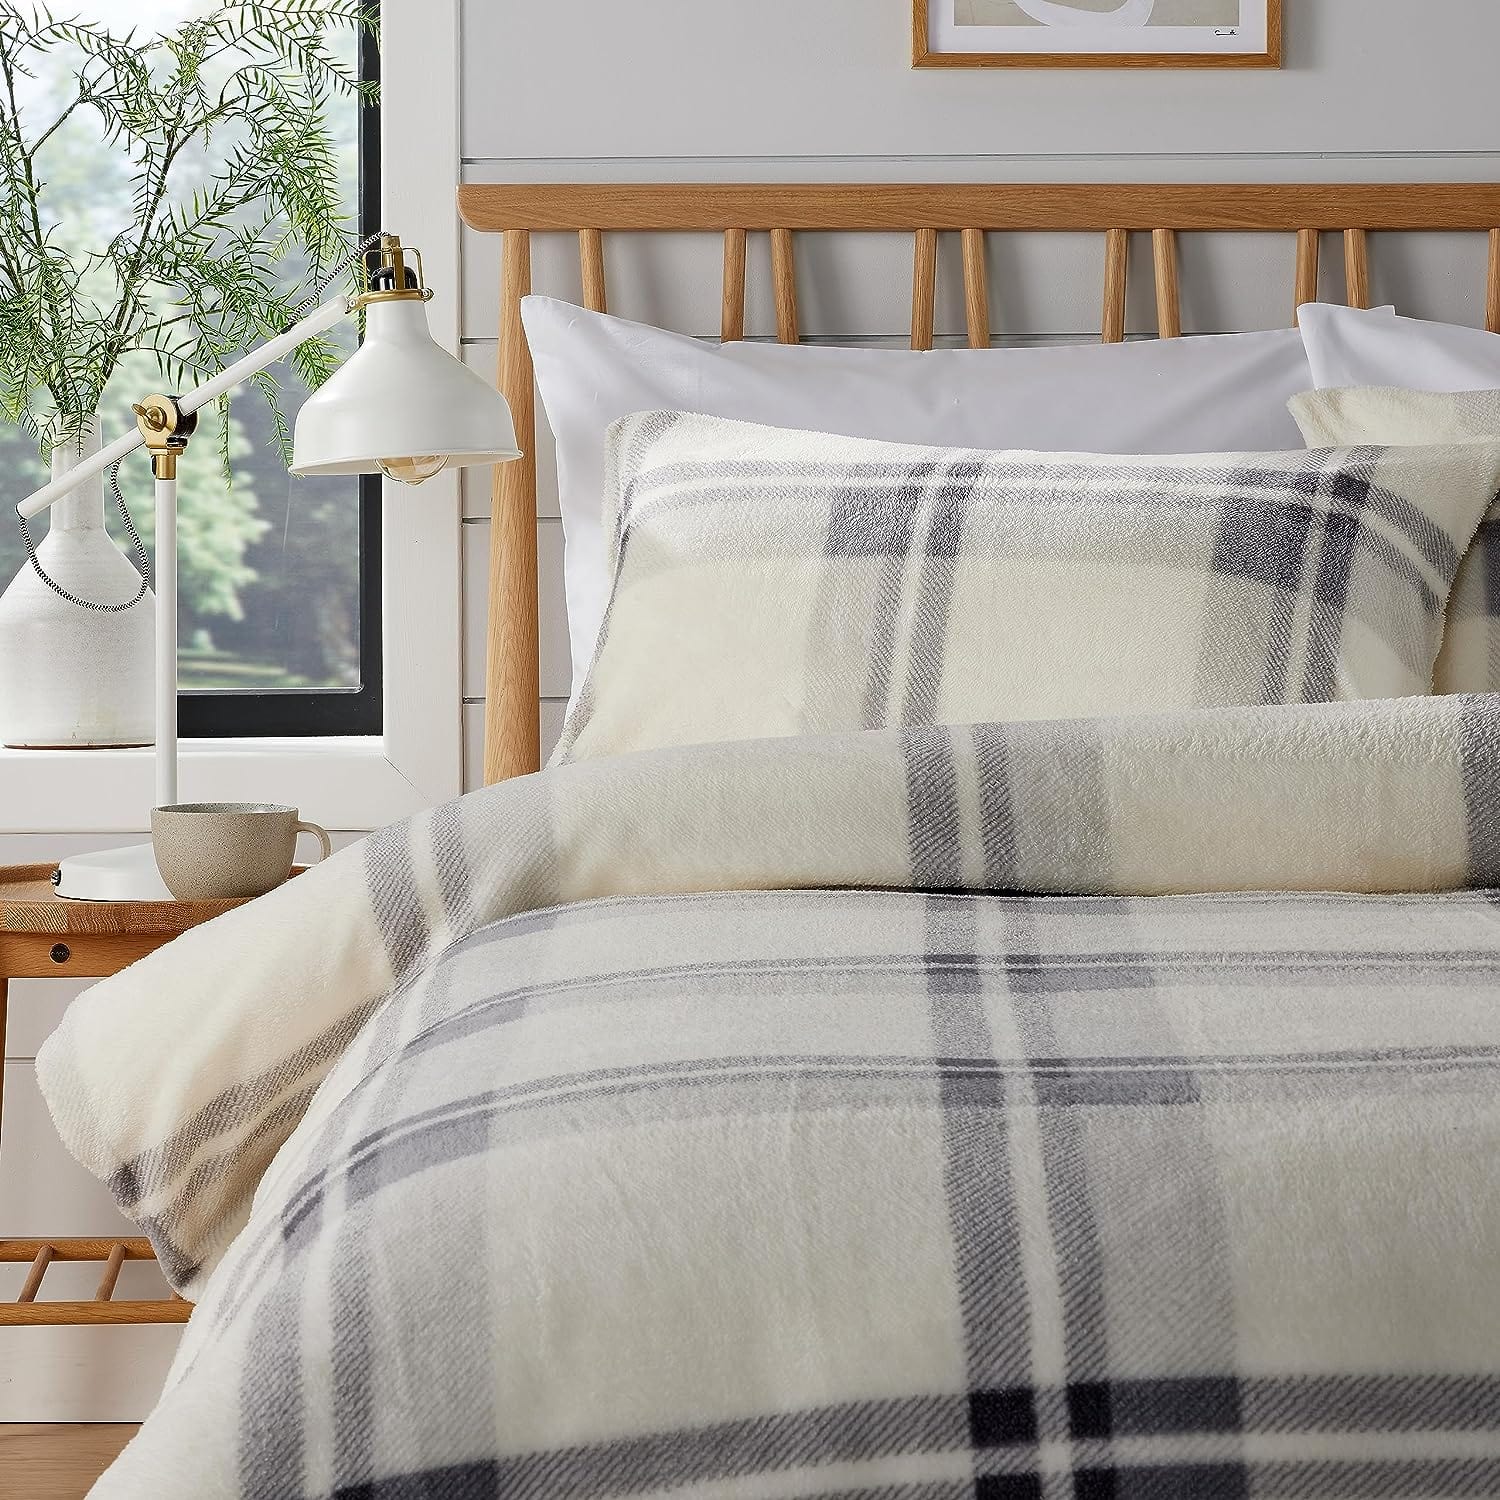 Orkney Check Printed Duvet Sets OLIVIA ROCCO Duvet Covers